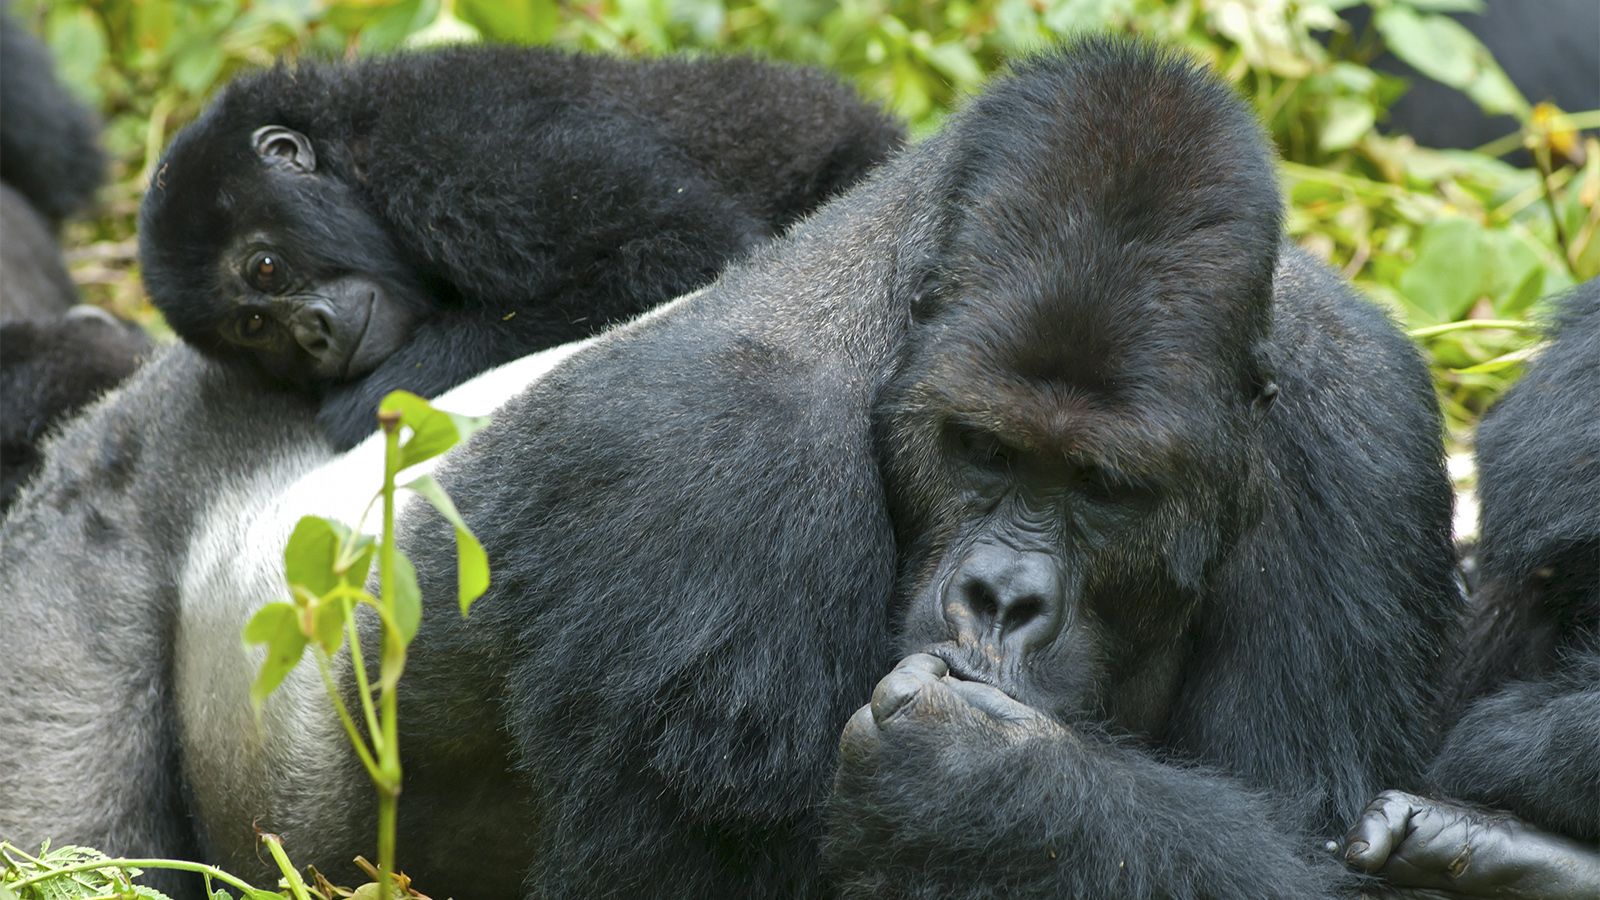 Big Hairy Facts About Gorillas